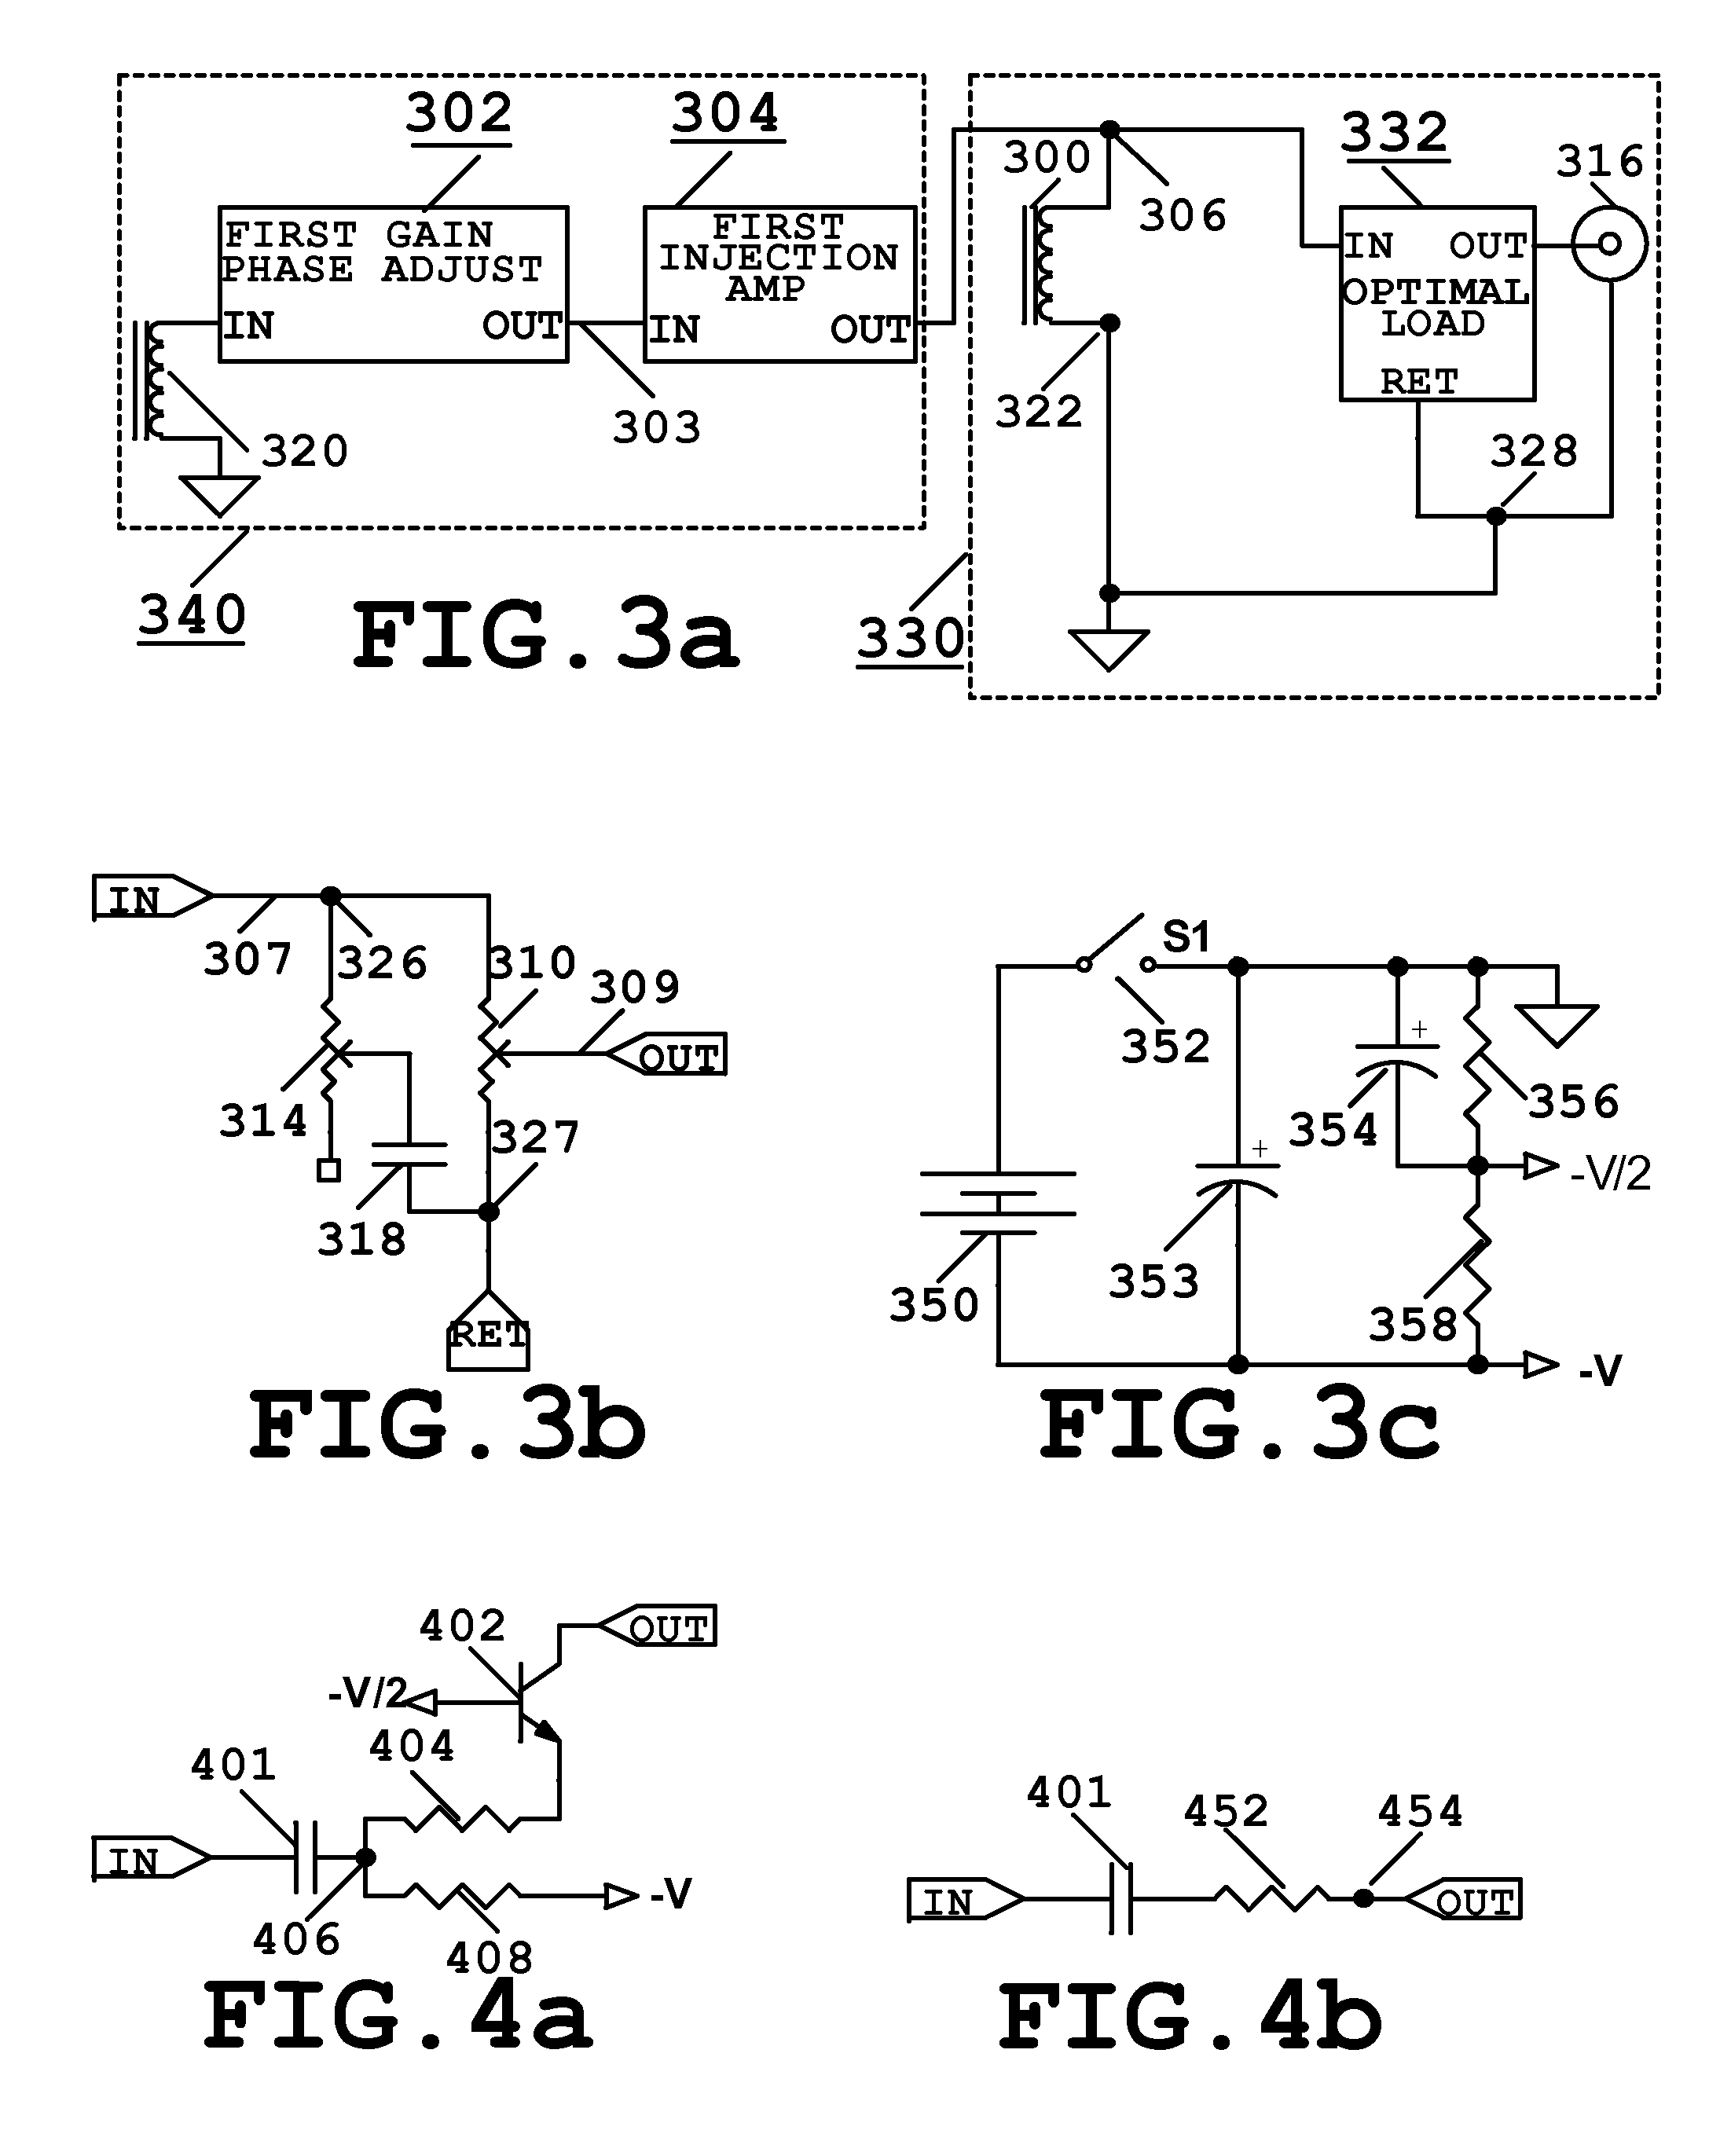 Pickup system for stringed musical instruments comprises of non-humbucking pickups with noise cancelling by current injection